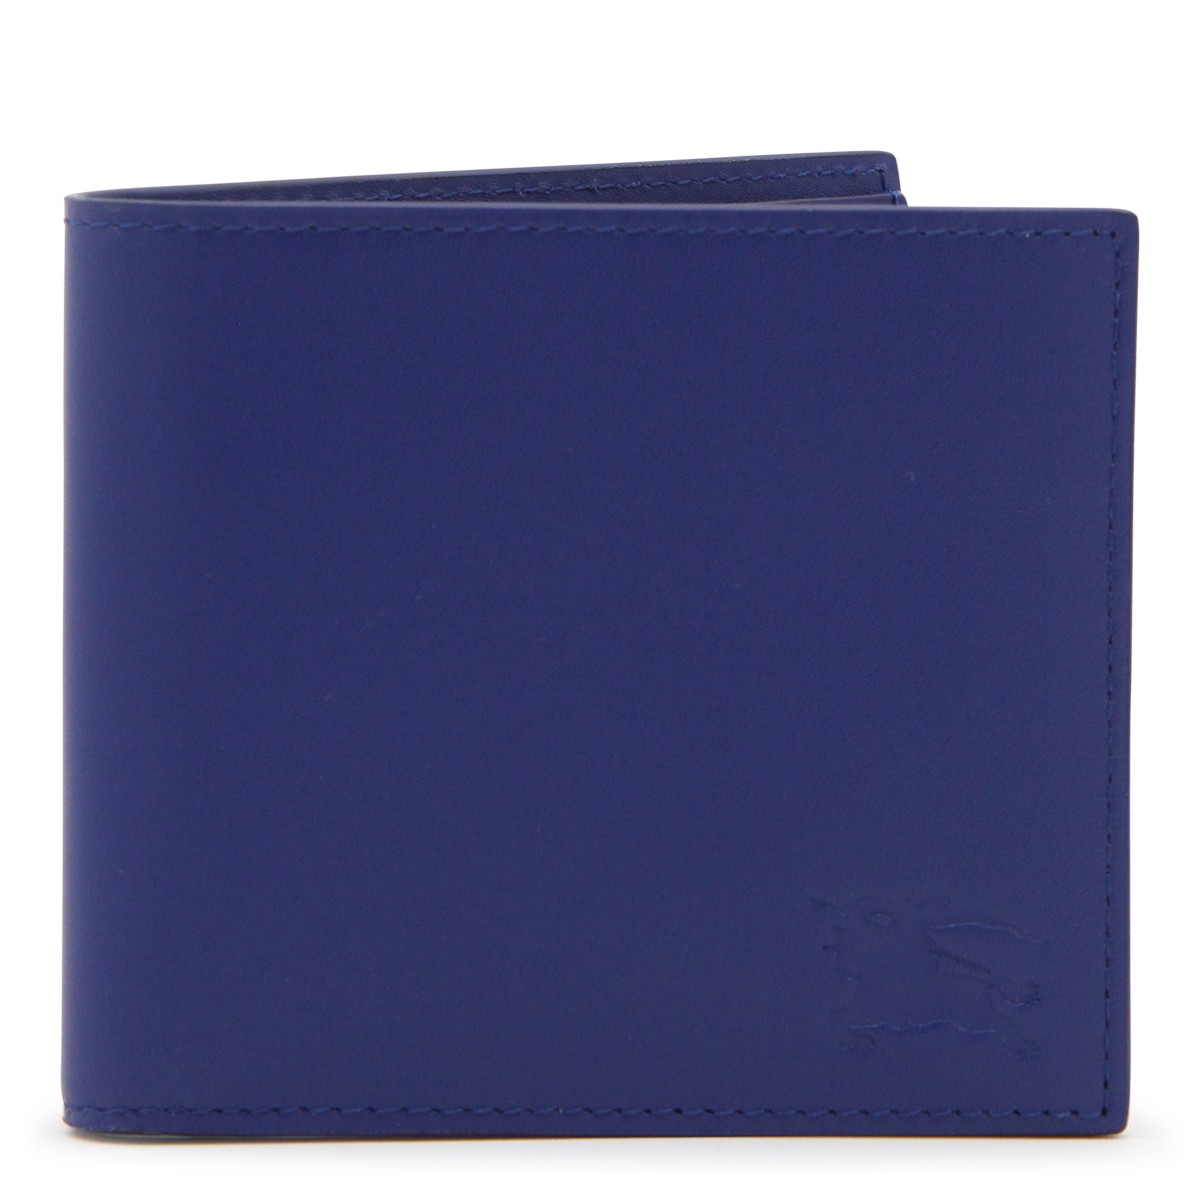 BLUE LEATHER EQUESTRIAN KNIGHT WALLET